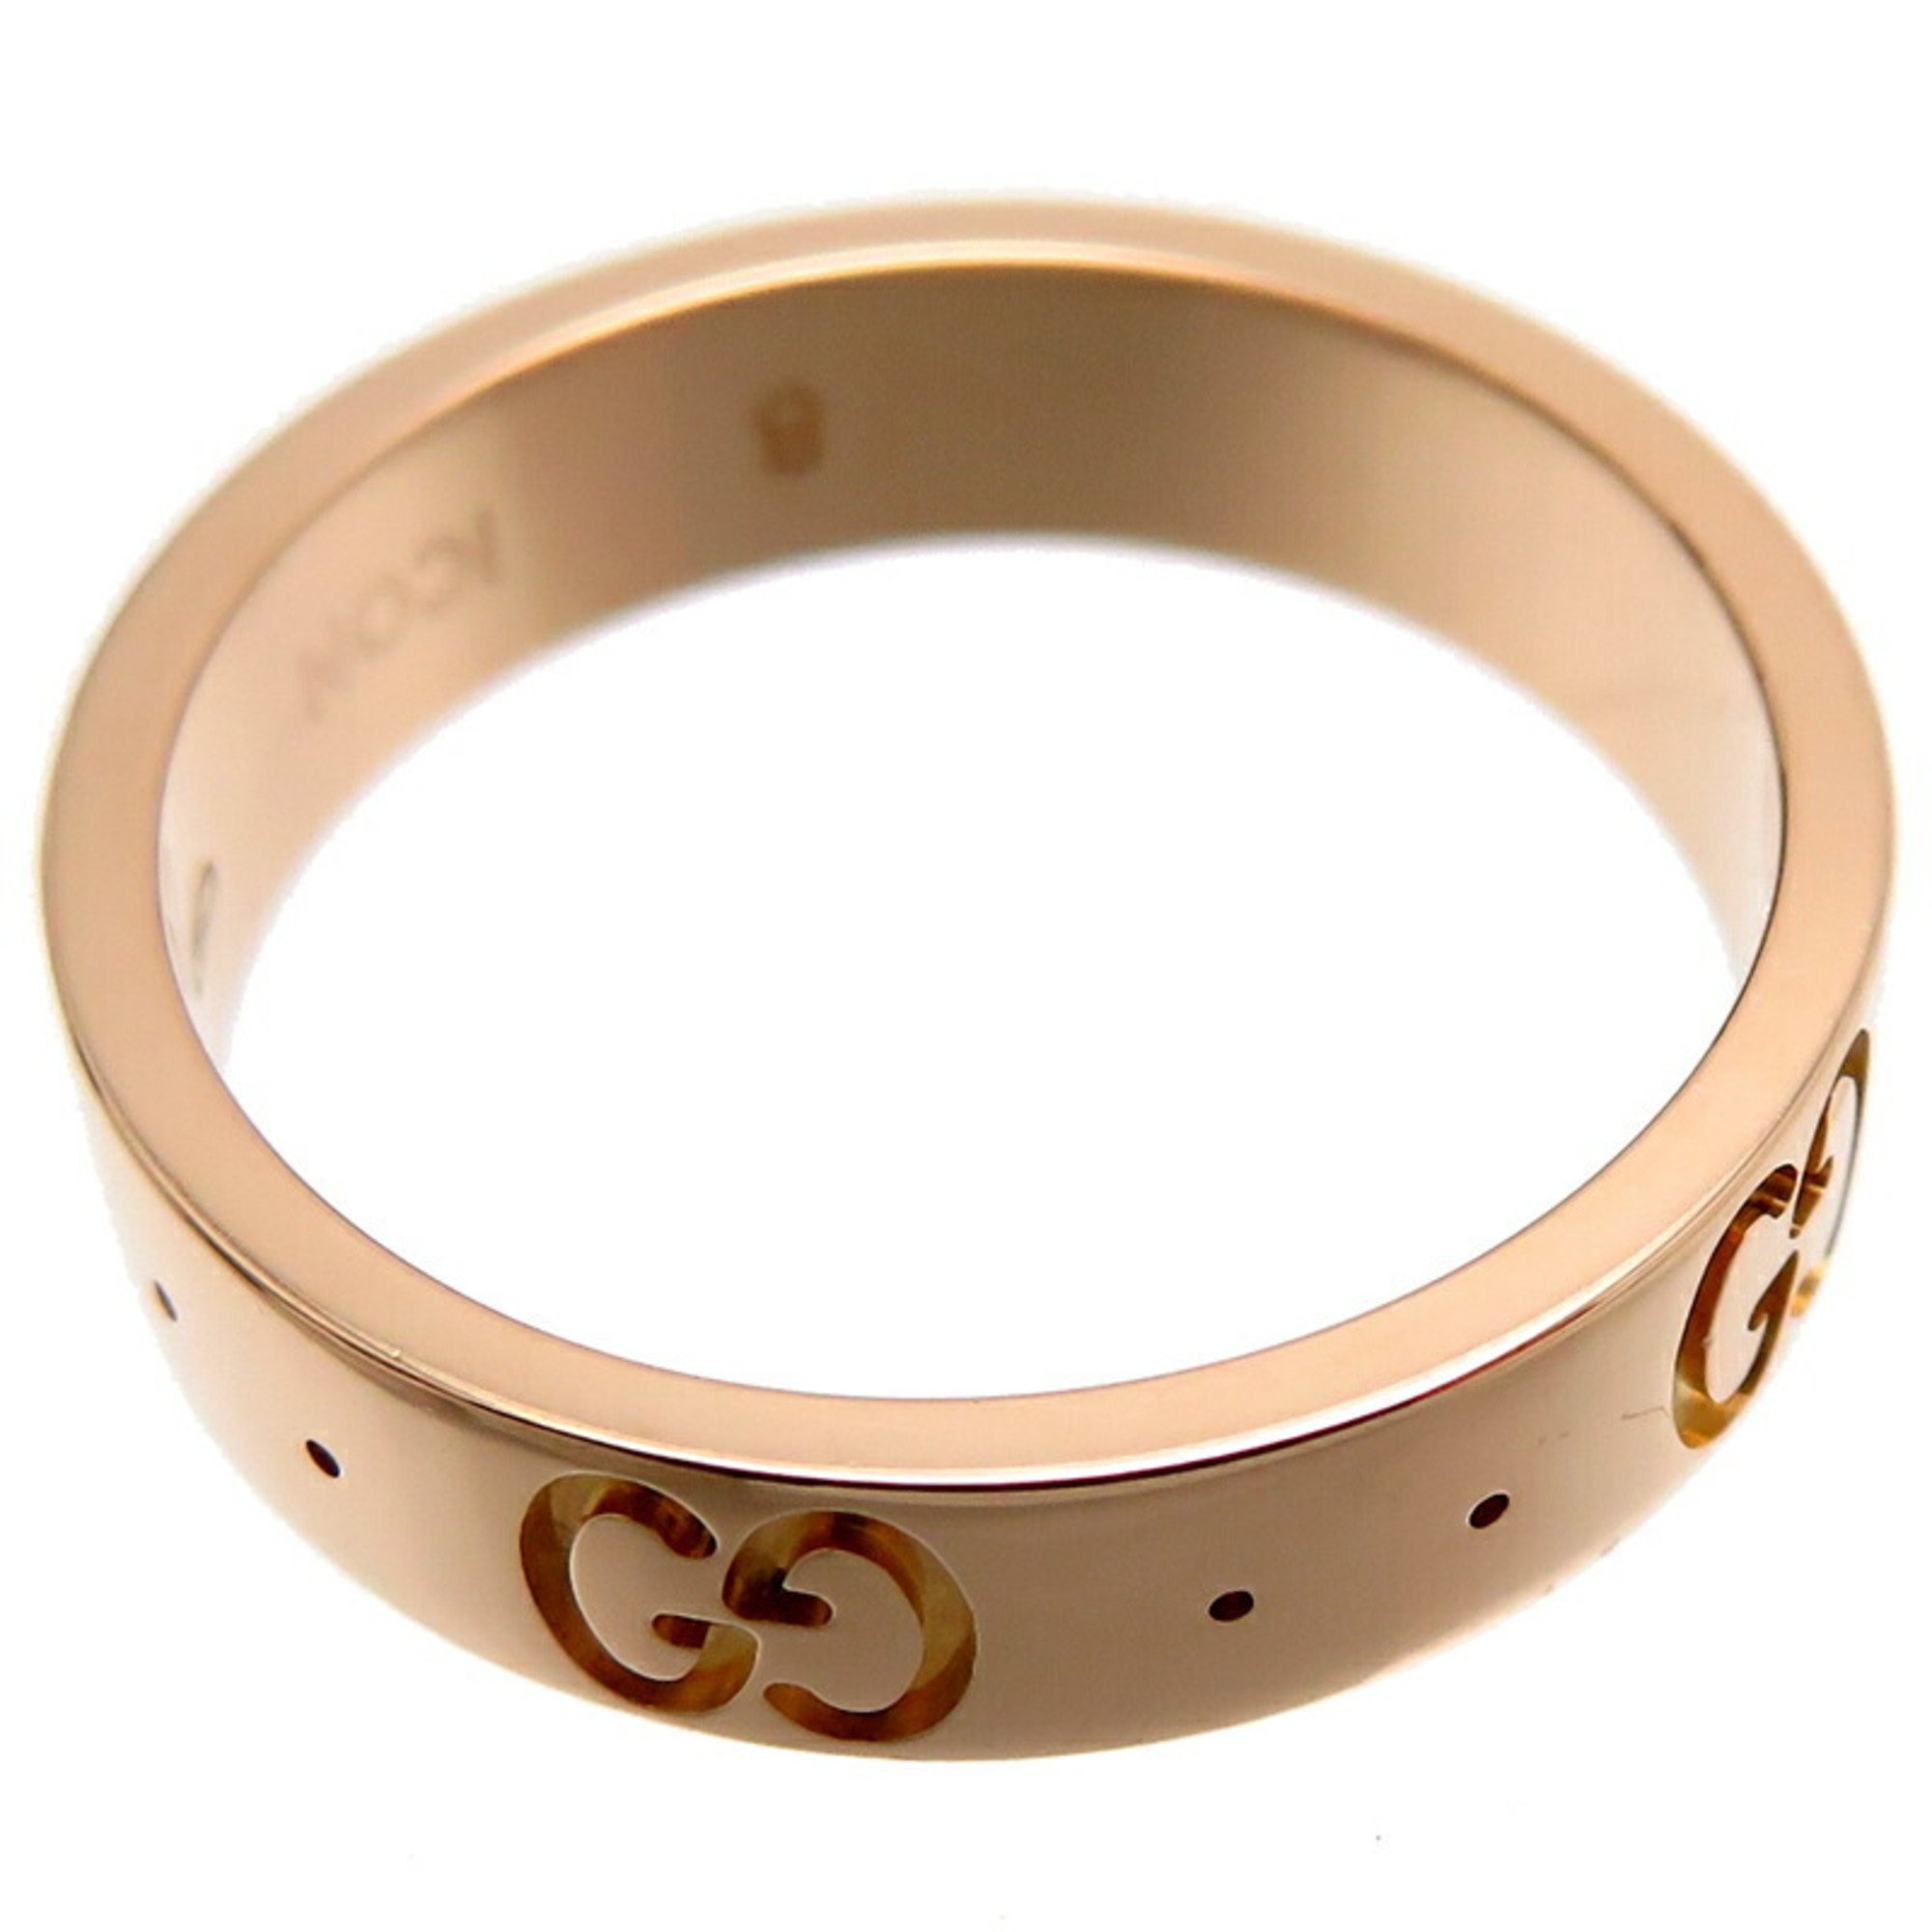 Gucci 750PG Icon Women's Ring, 750 Pink Gold, Size 8